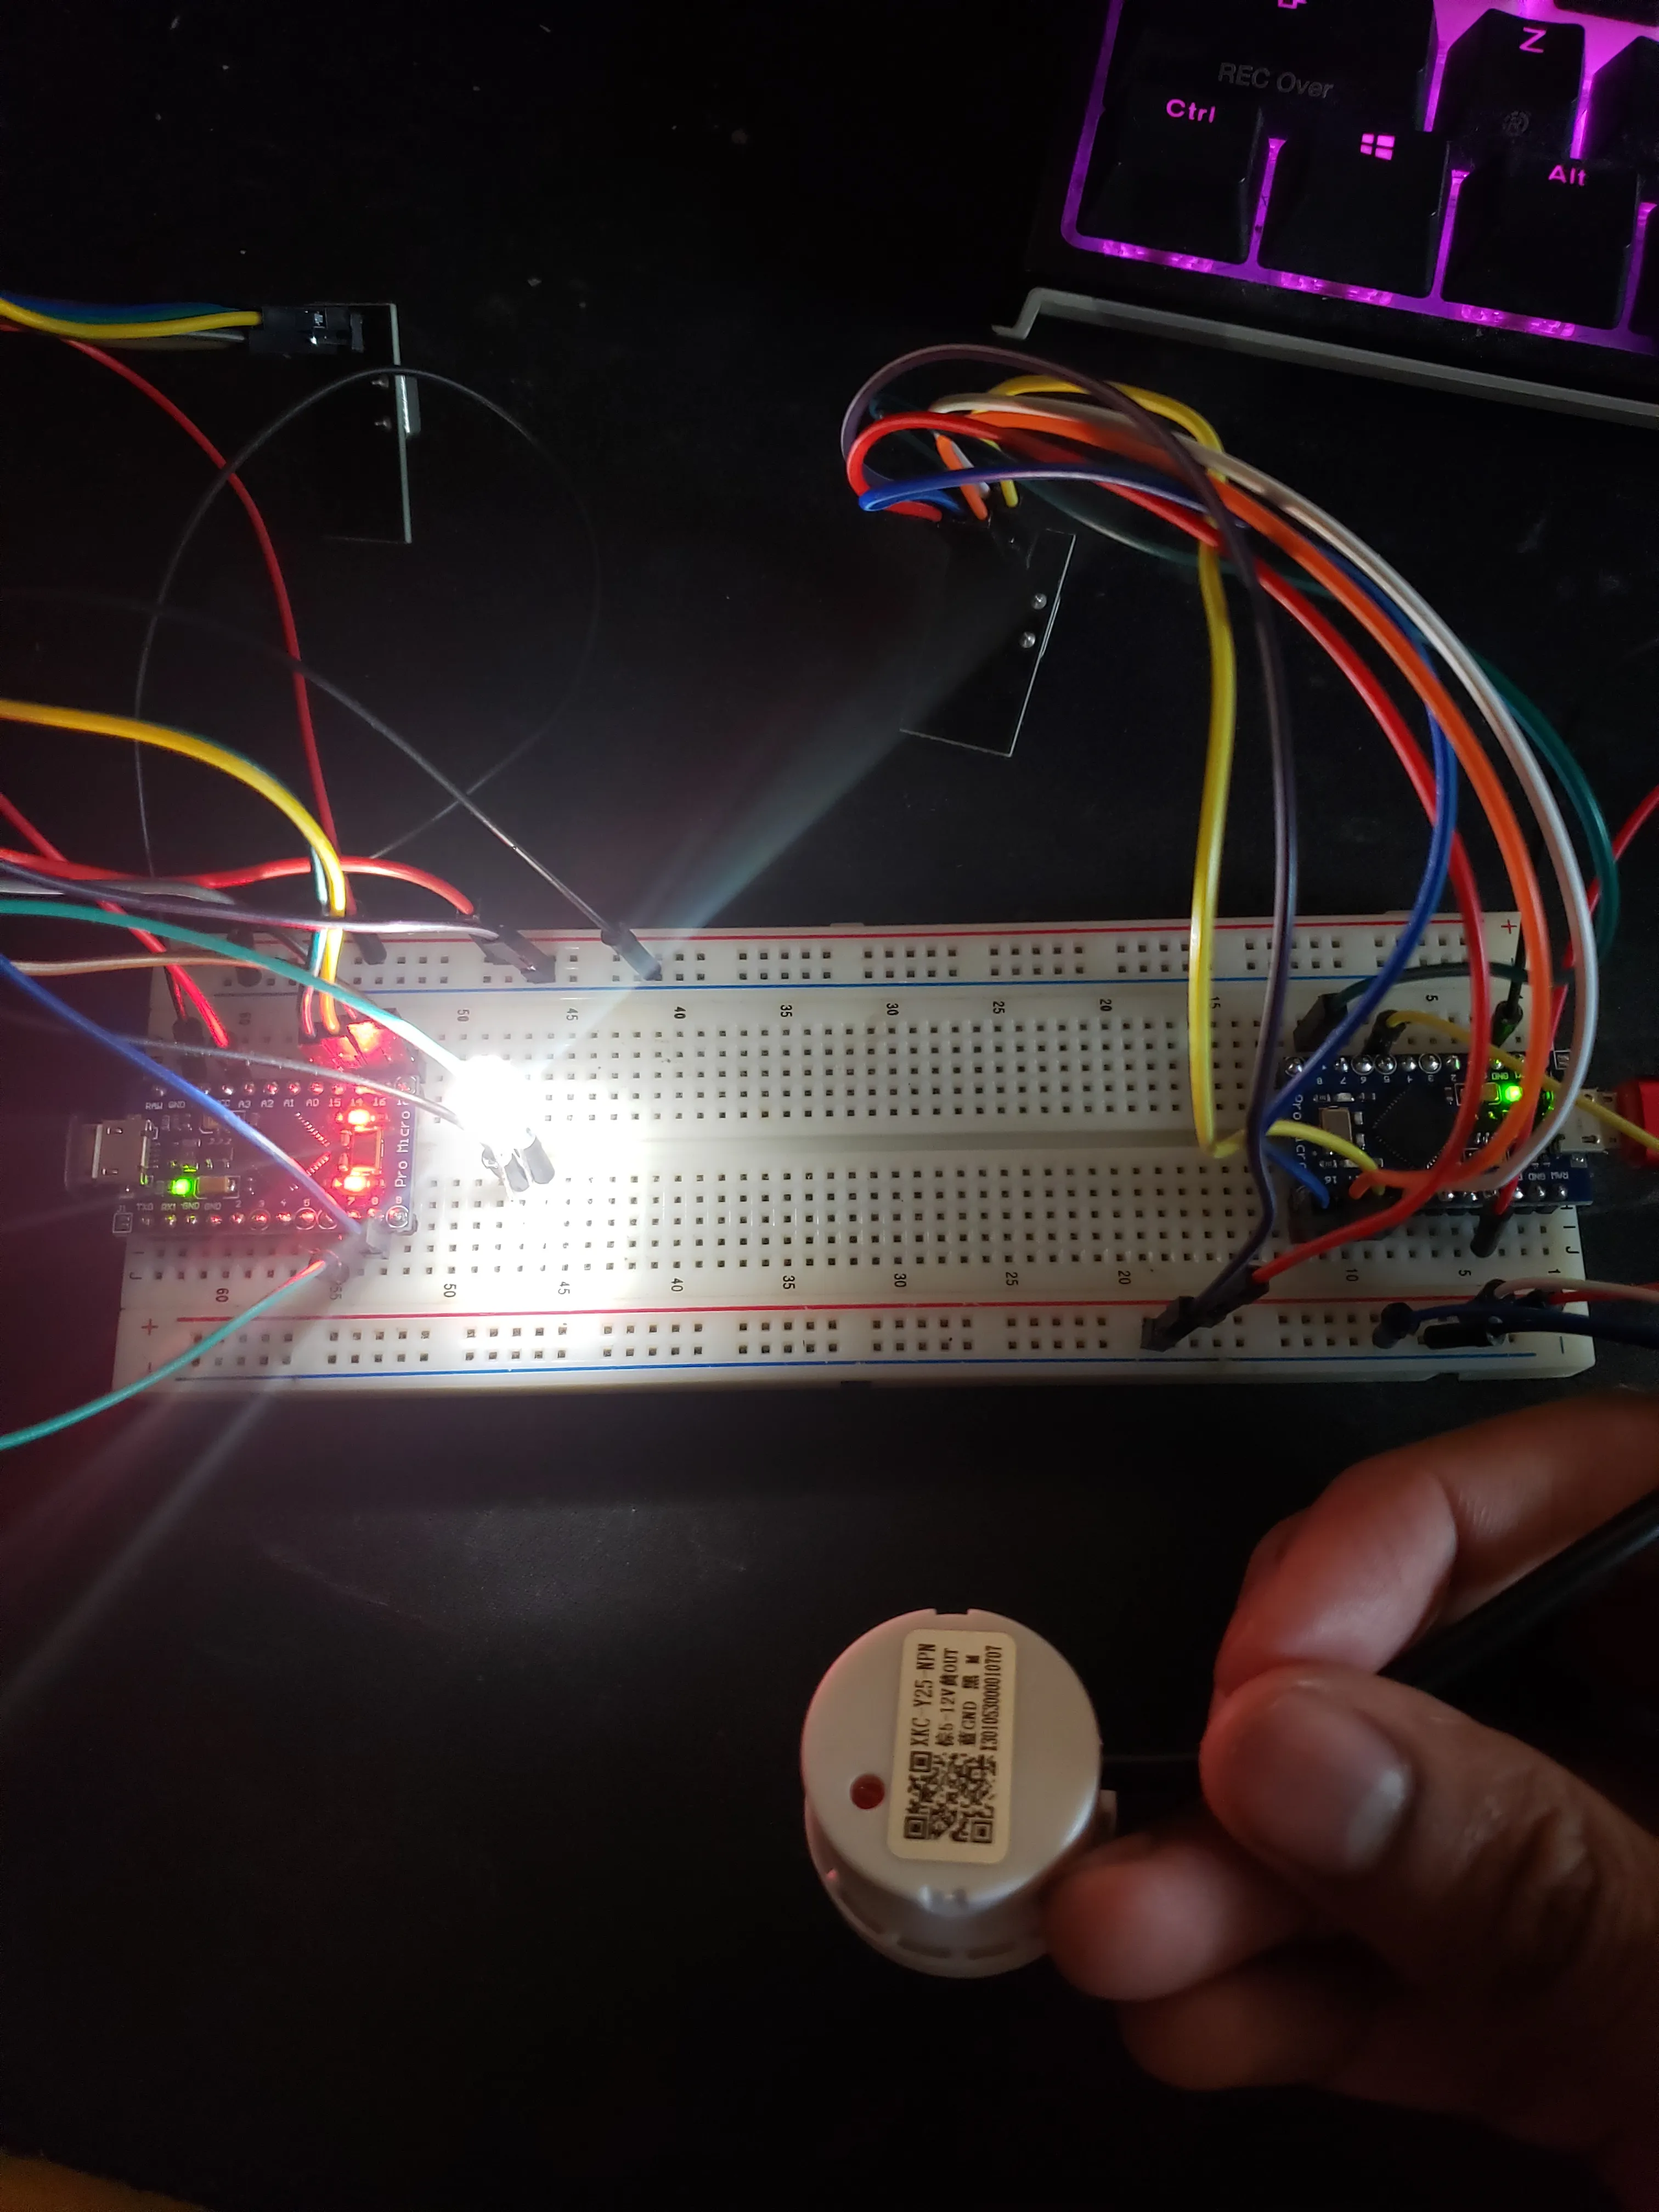 Nothing over the non contact fluid sensor shows that the led on the other micro is on, therefor simulating that the water level is below the sensor.